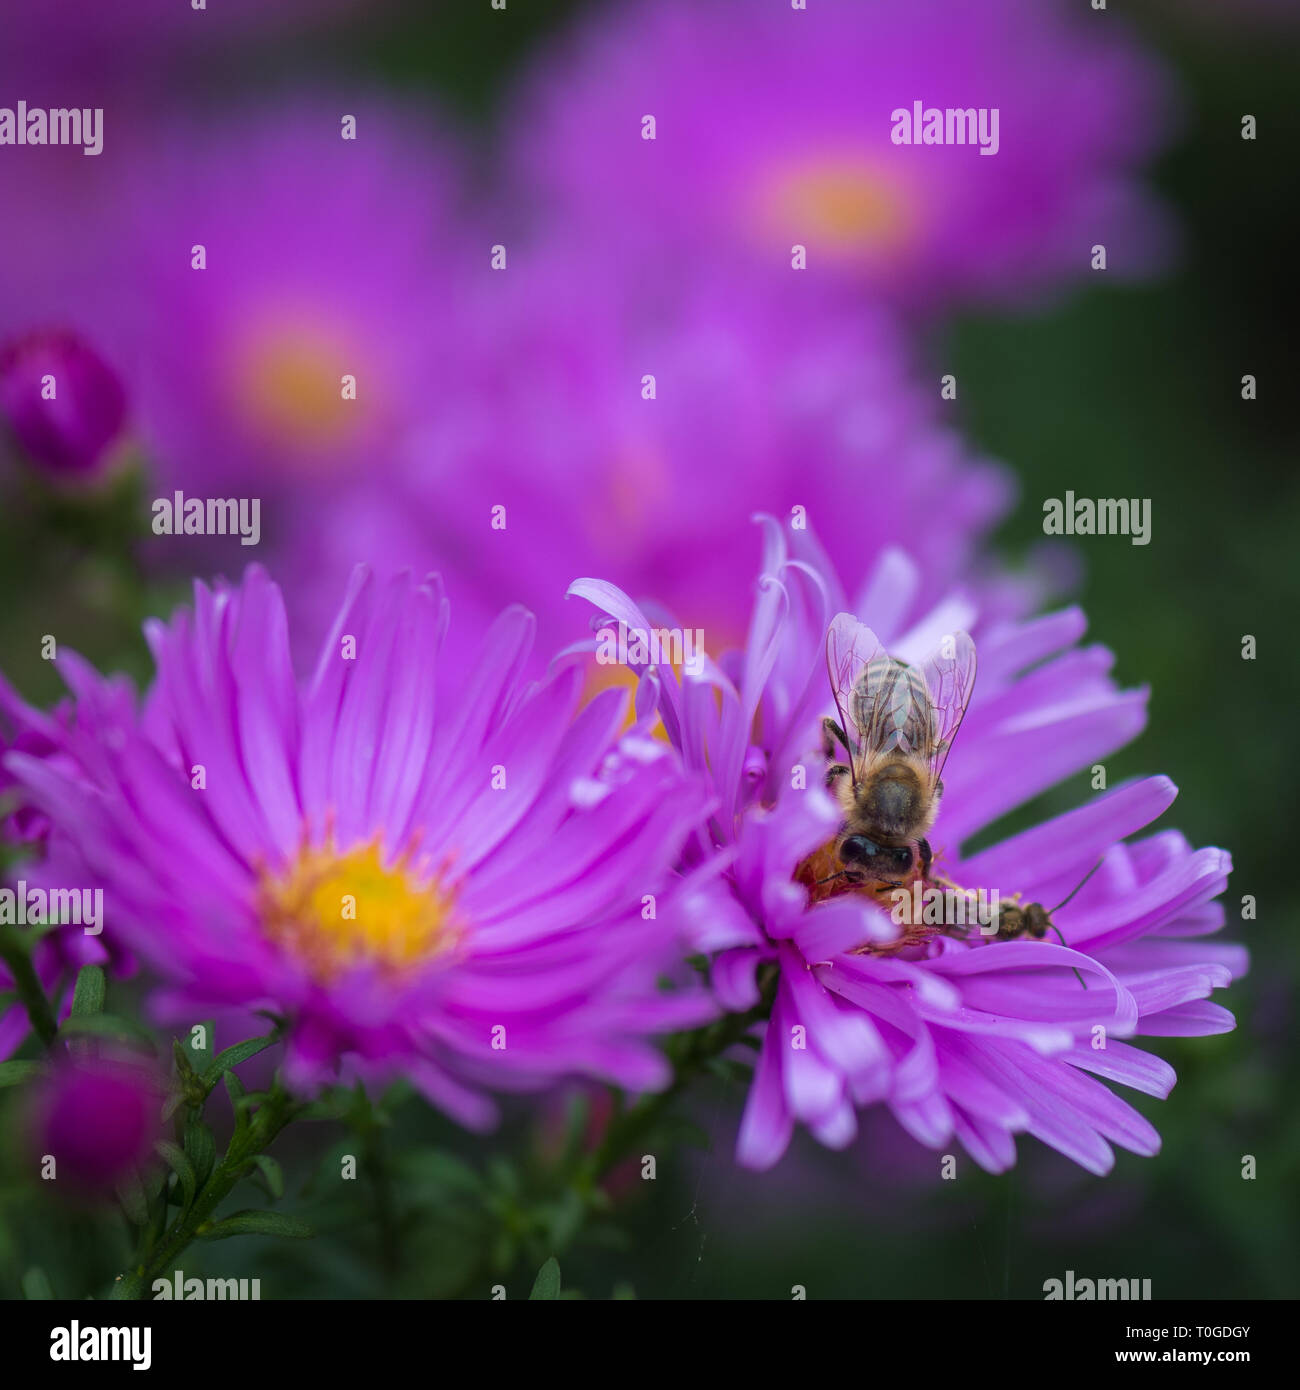 Aster amellus, perennial flowering plants in the family Asteraceae and pollinating honey bee in Wakehurst Wild Botanic Garden, United Kingdom Stock Photo